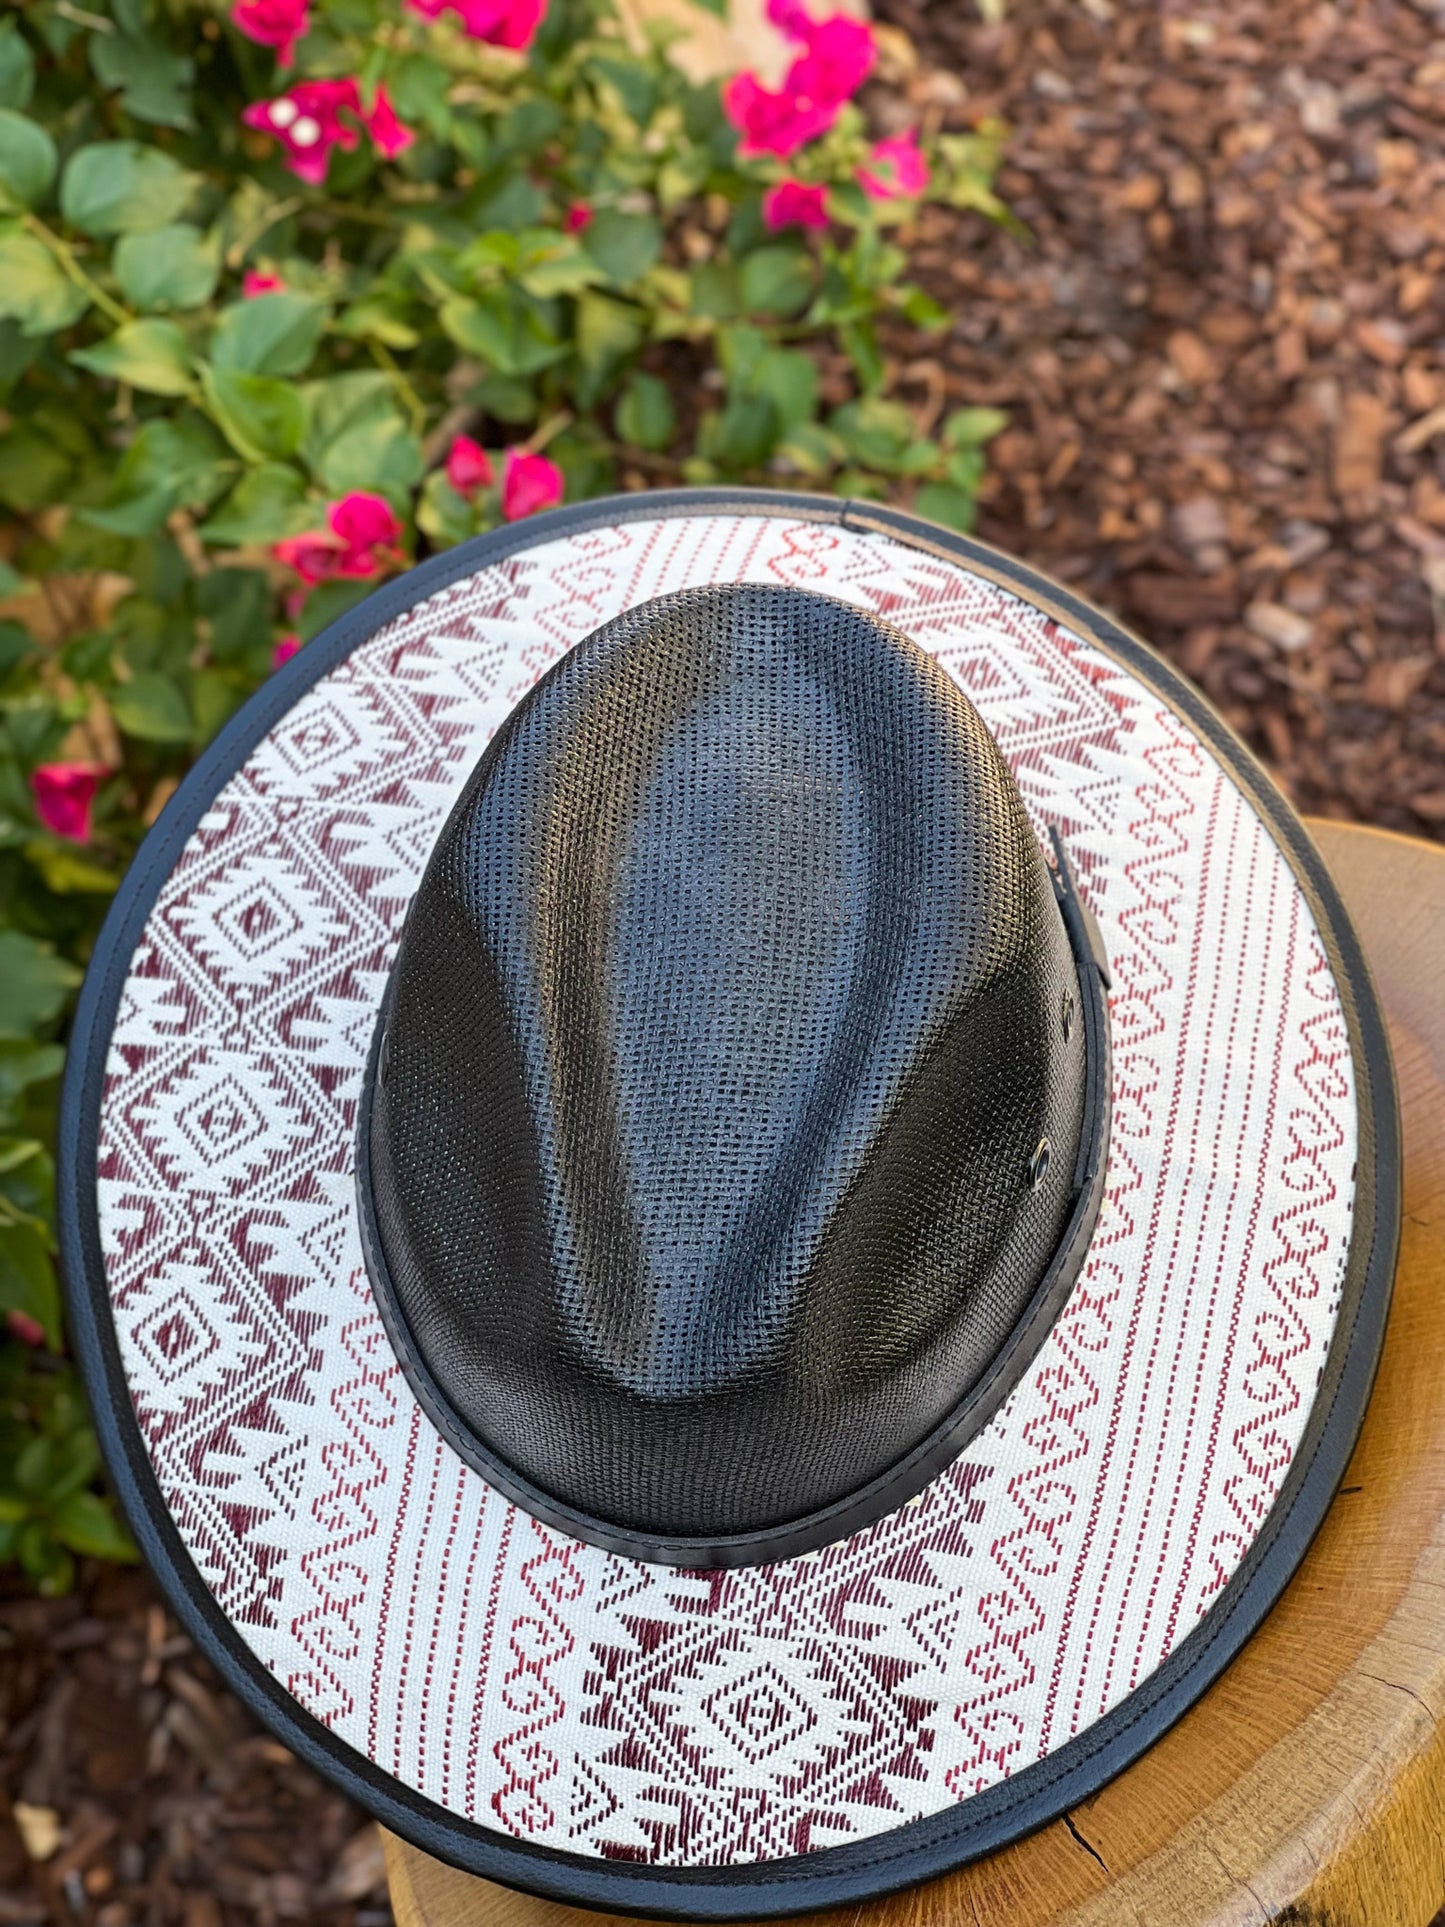 Our "Harvest Moon Fedora Hat" has a black leather top and flat wide brim. It has a geometric unique design that you can rock this season. Shop our hats collection at lazochic.com.